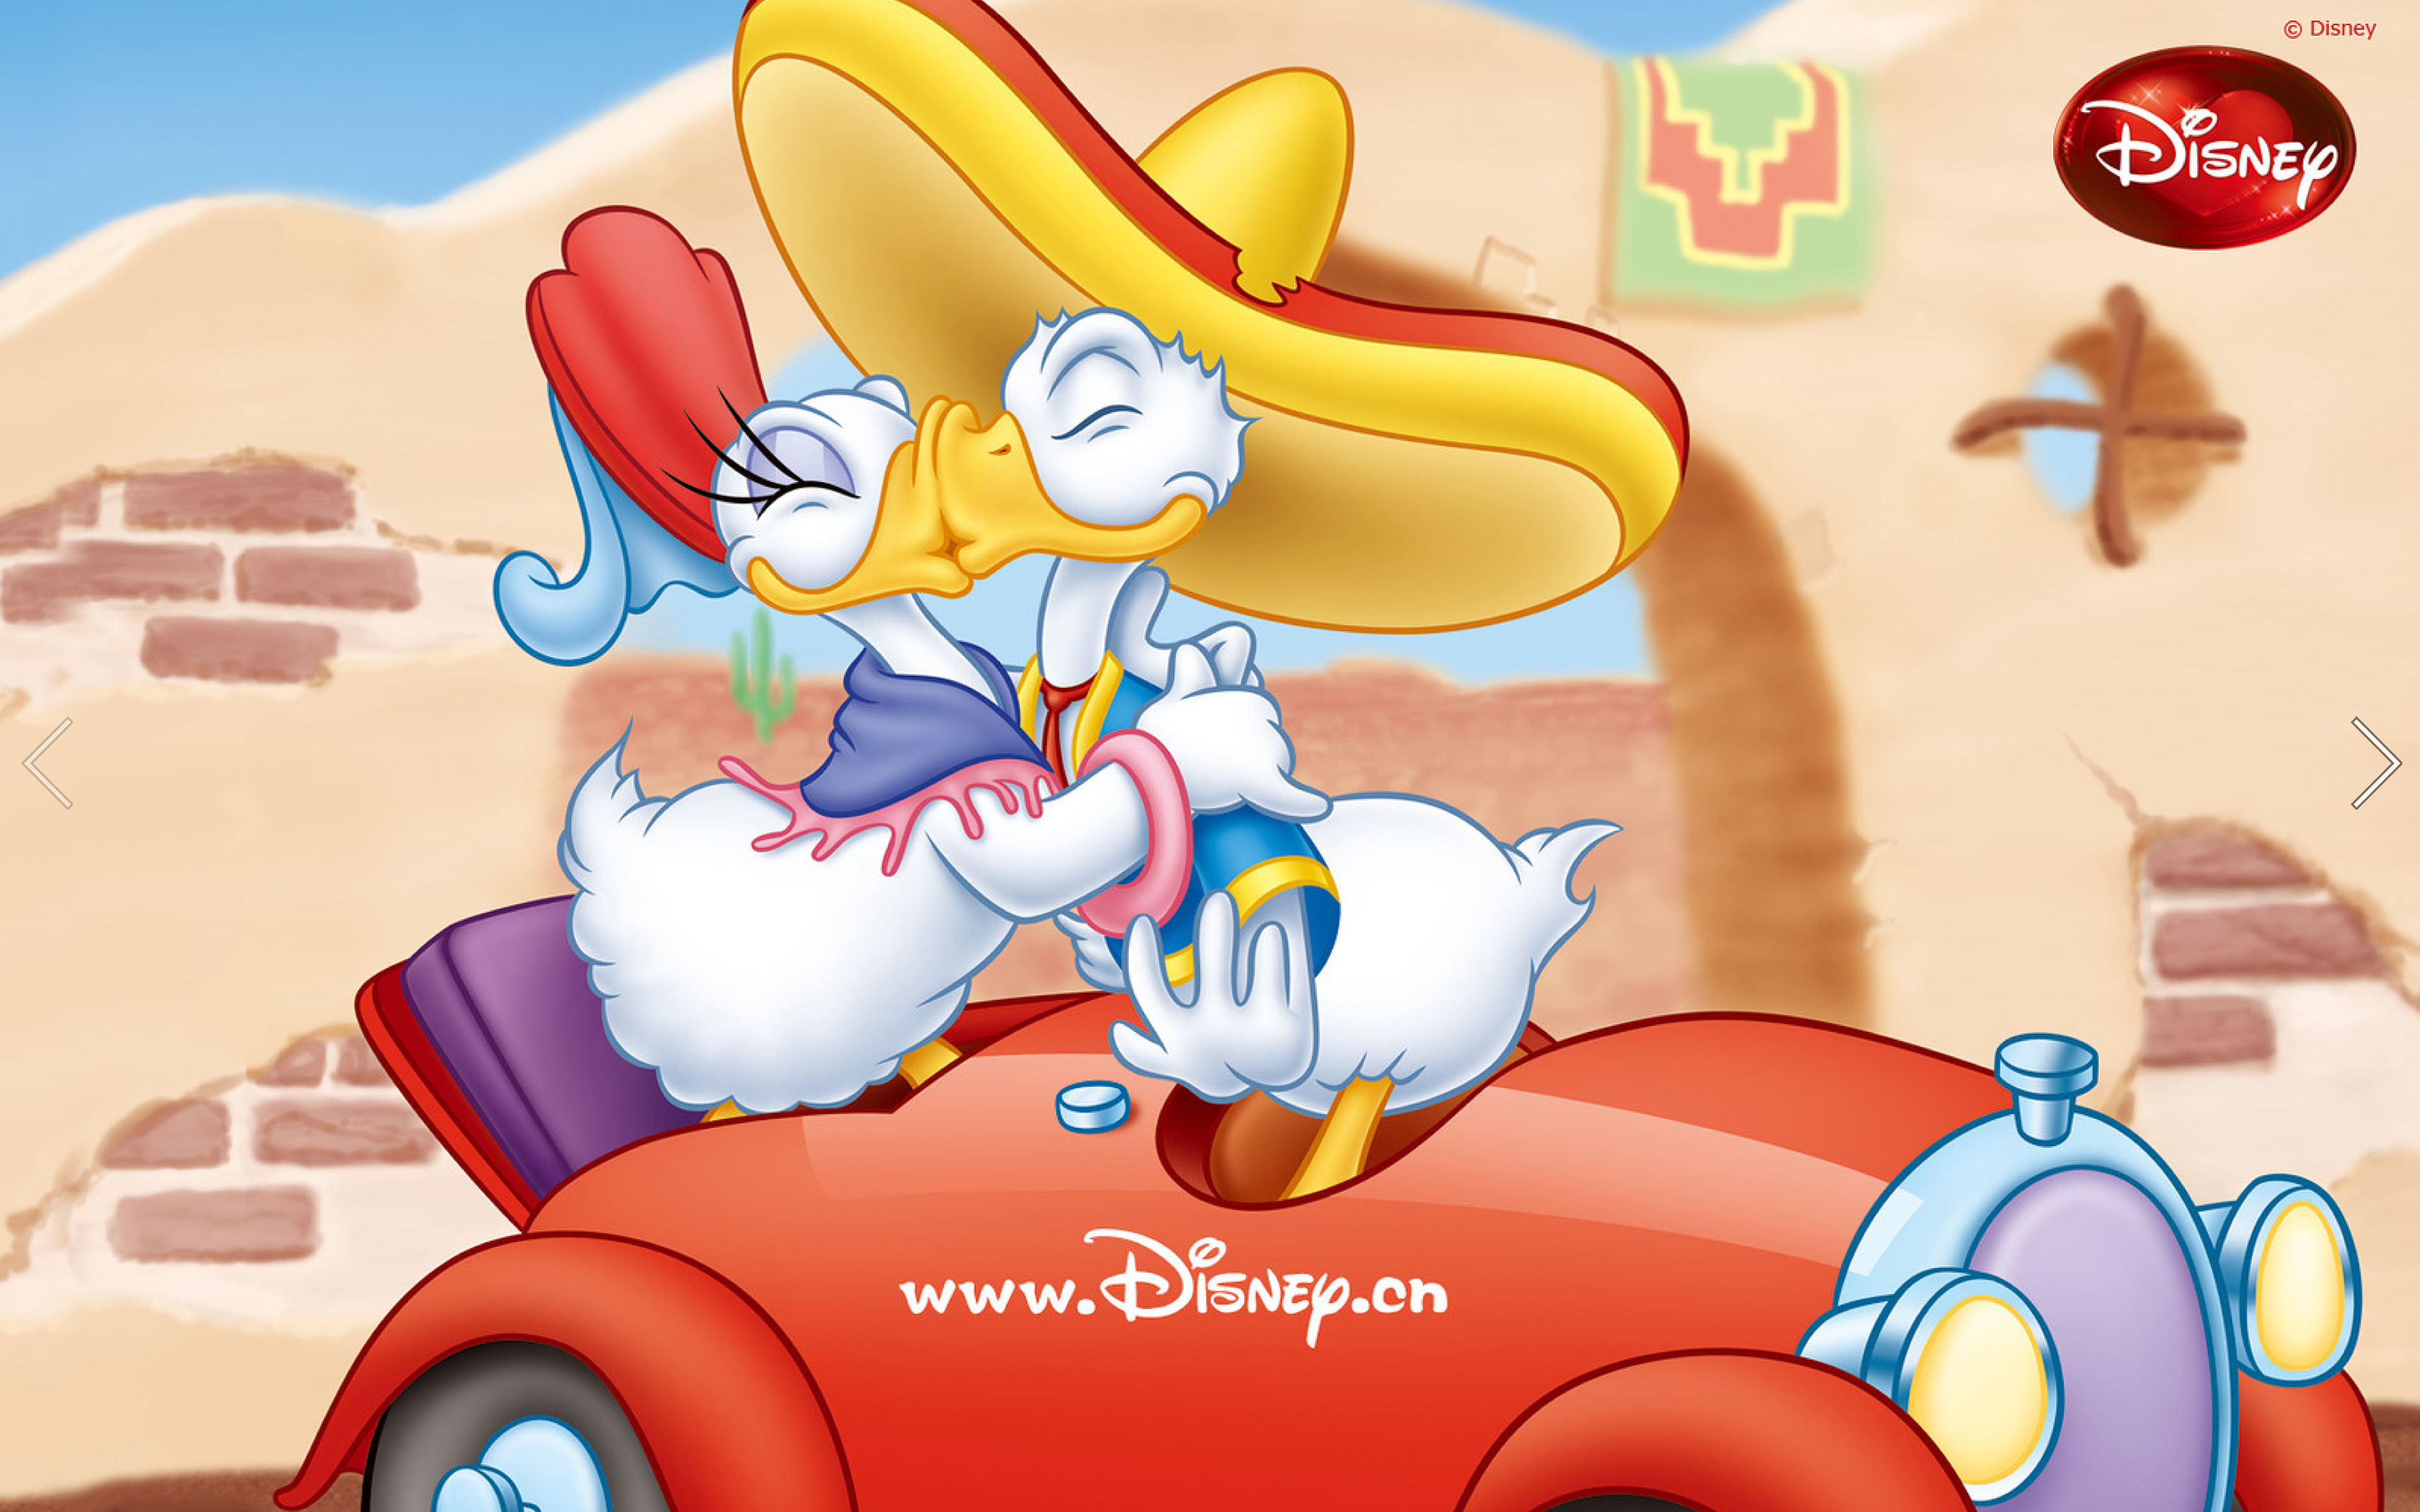 Cartoon Donald Duck And Daisy Duck Hot Kissing Wallpapers Hd 3840x240.